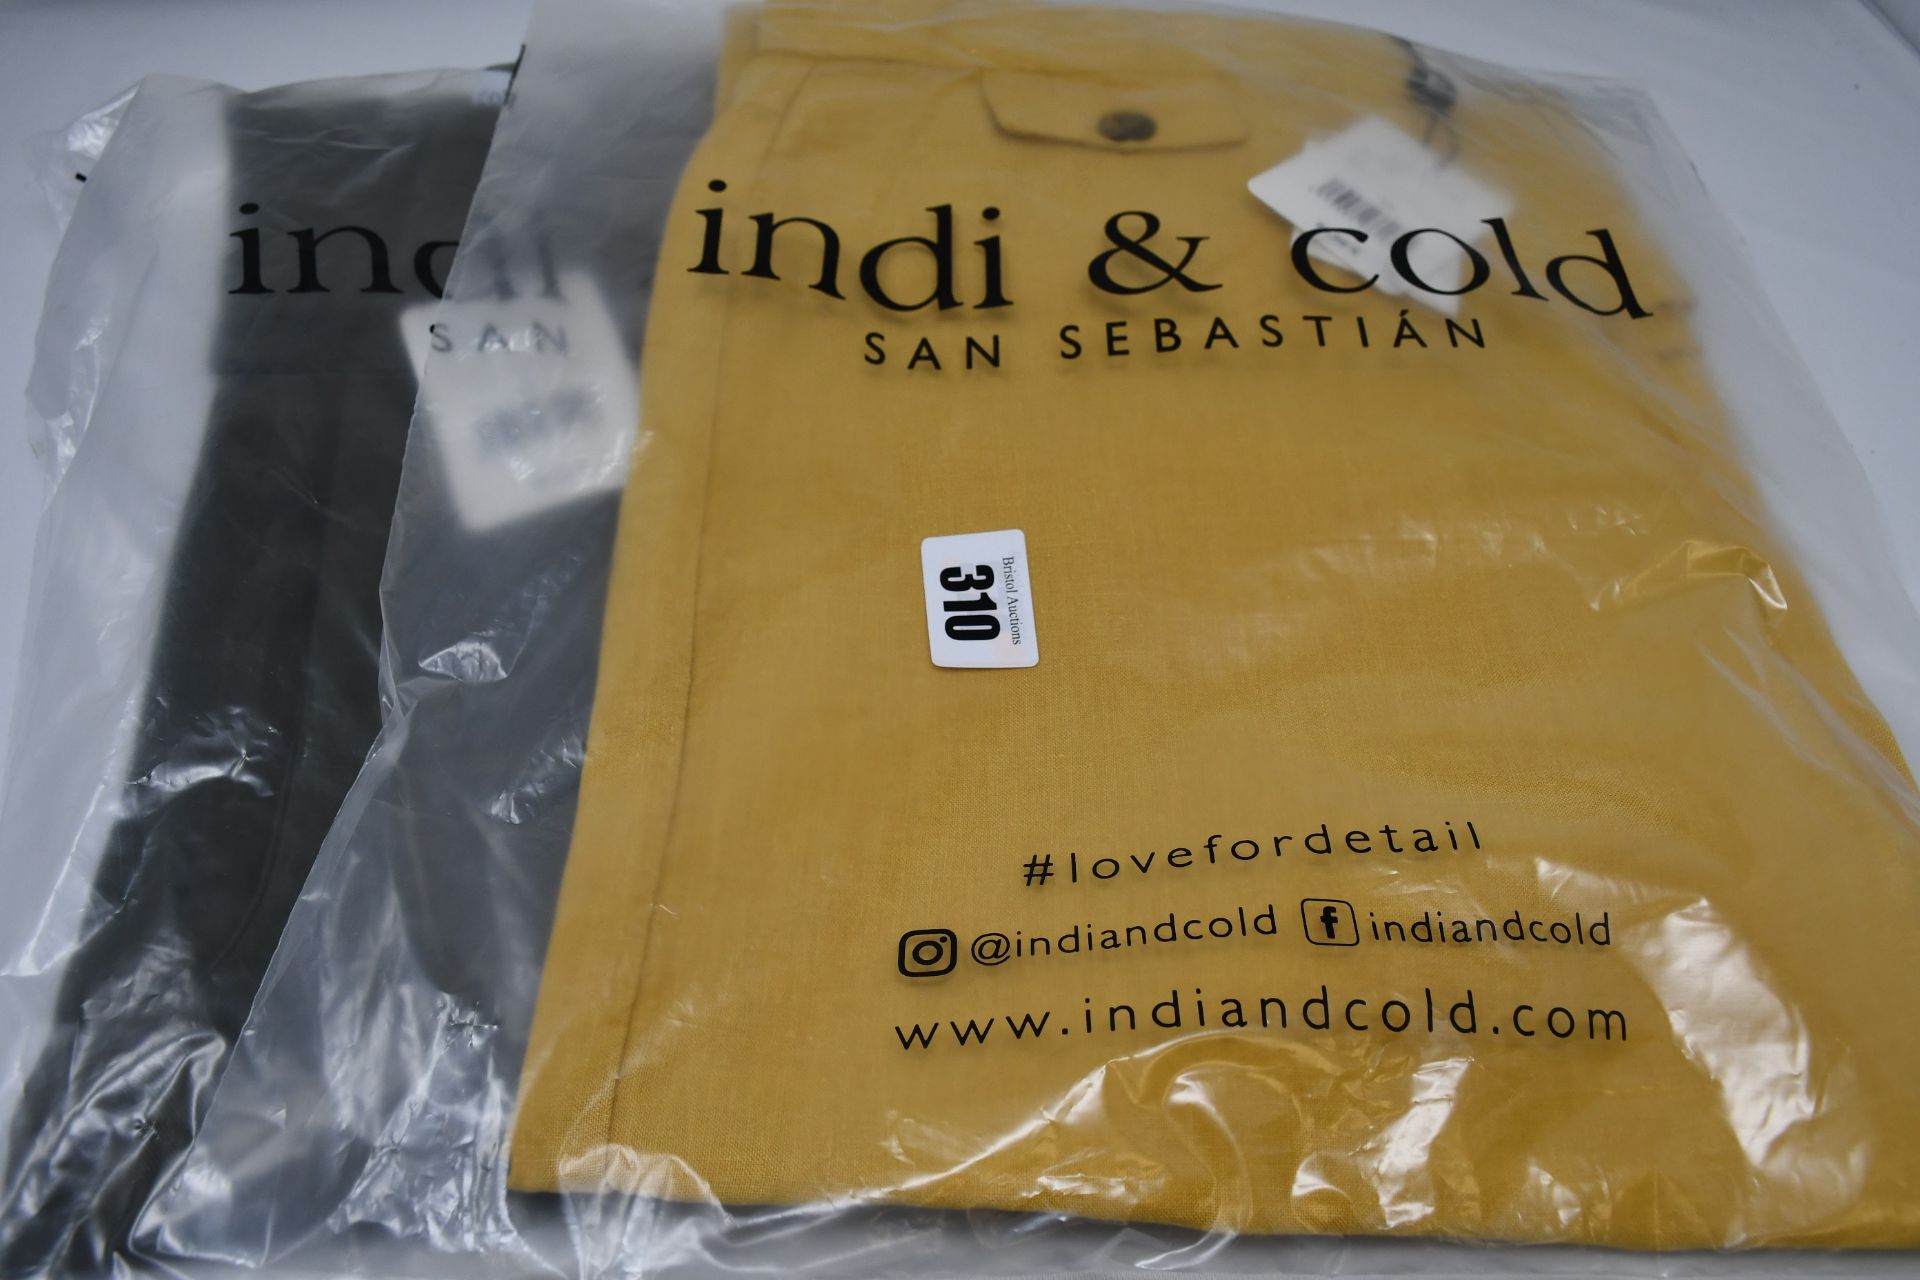 Four pairs of as new Indi & Cold Pantalon trousers (2 x 44 and 2 x 40 - RRP €90 each).